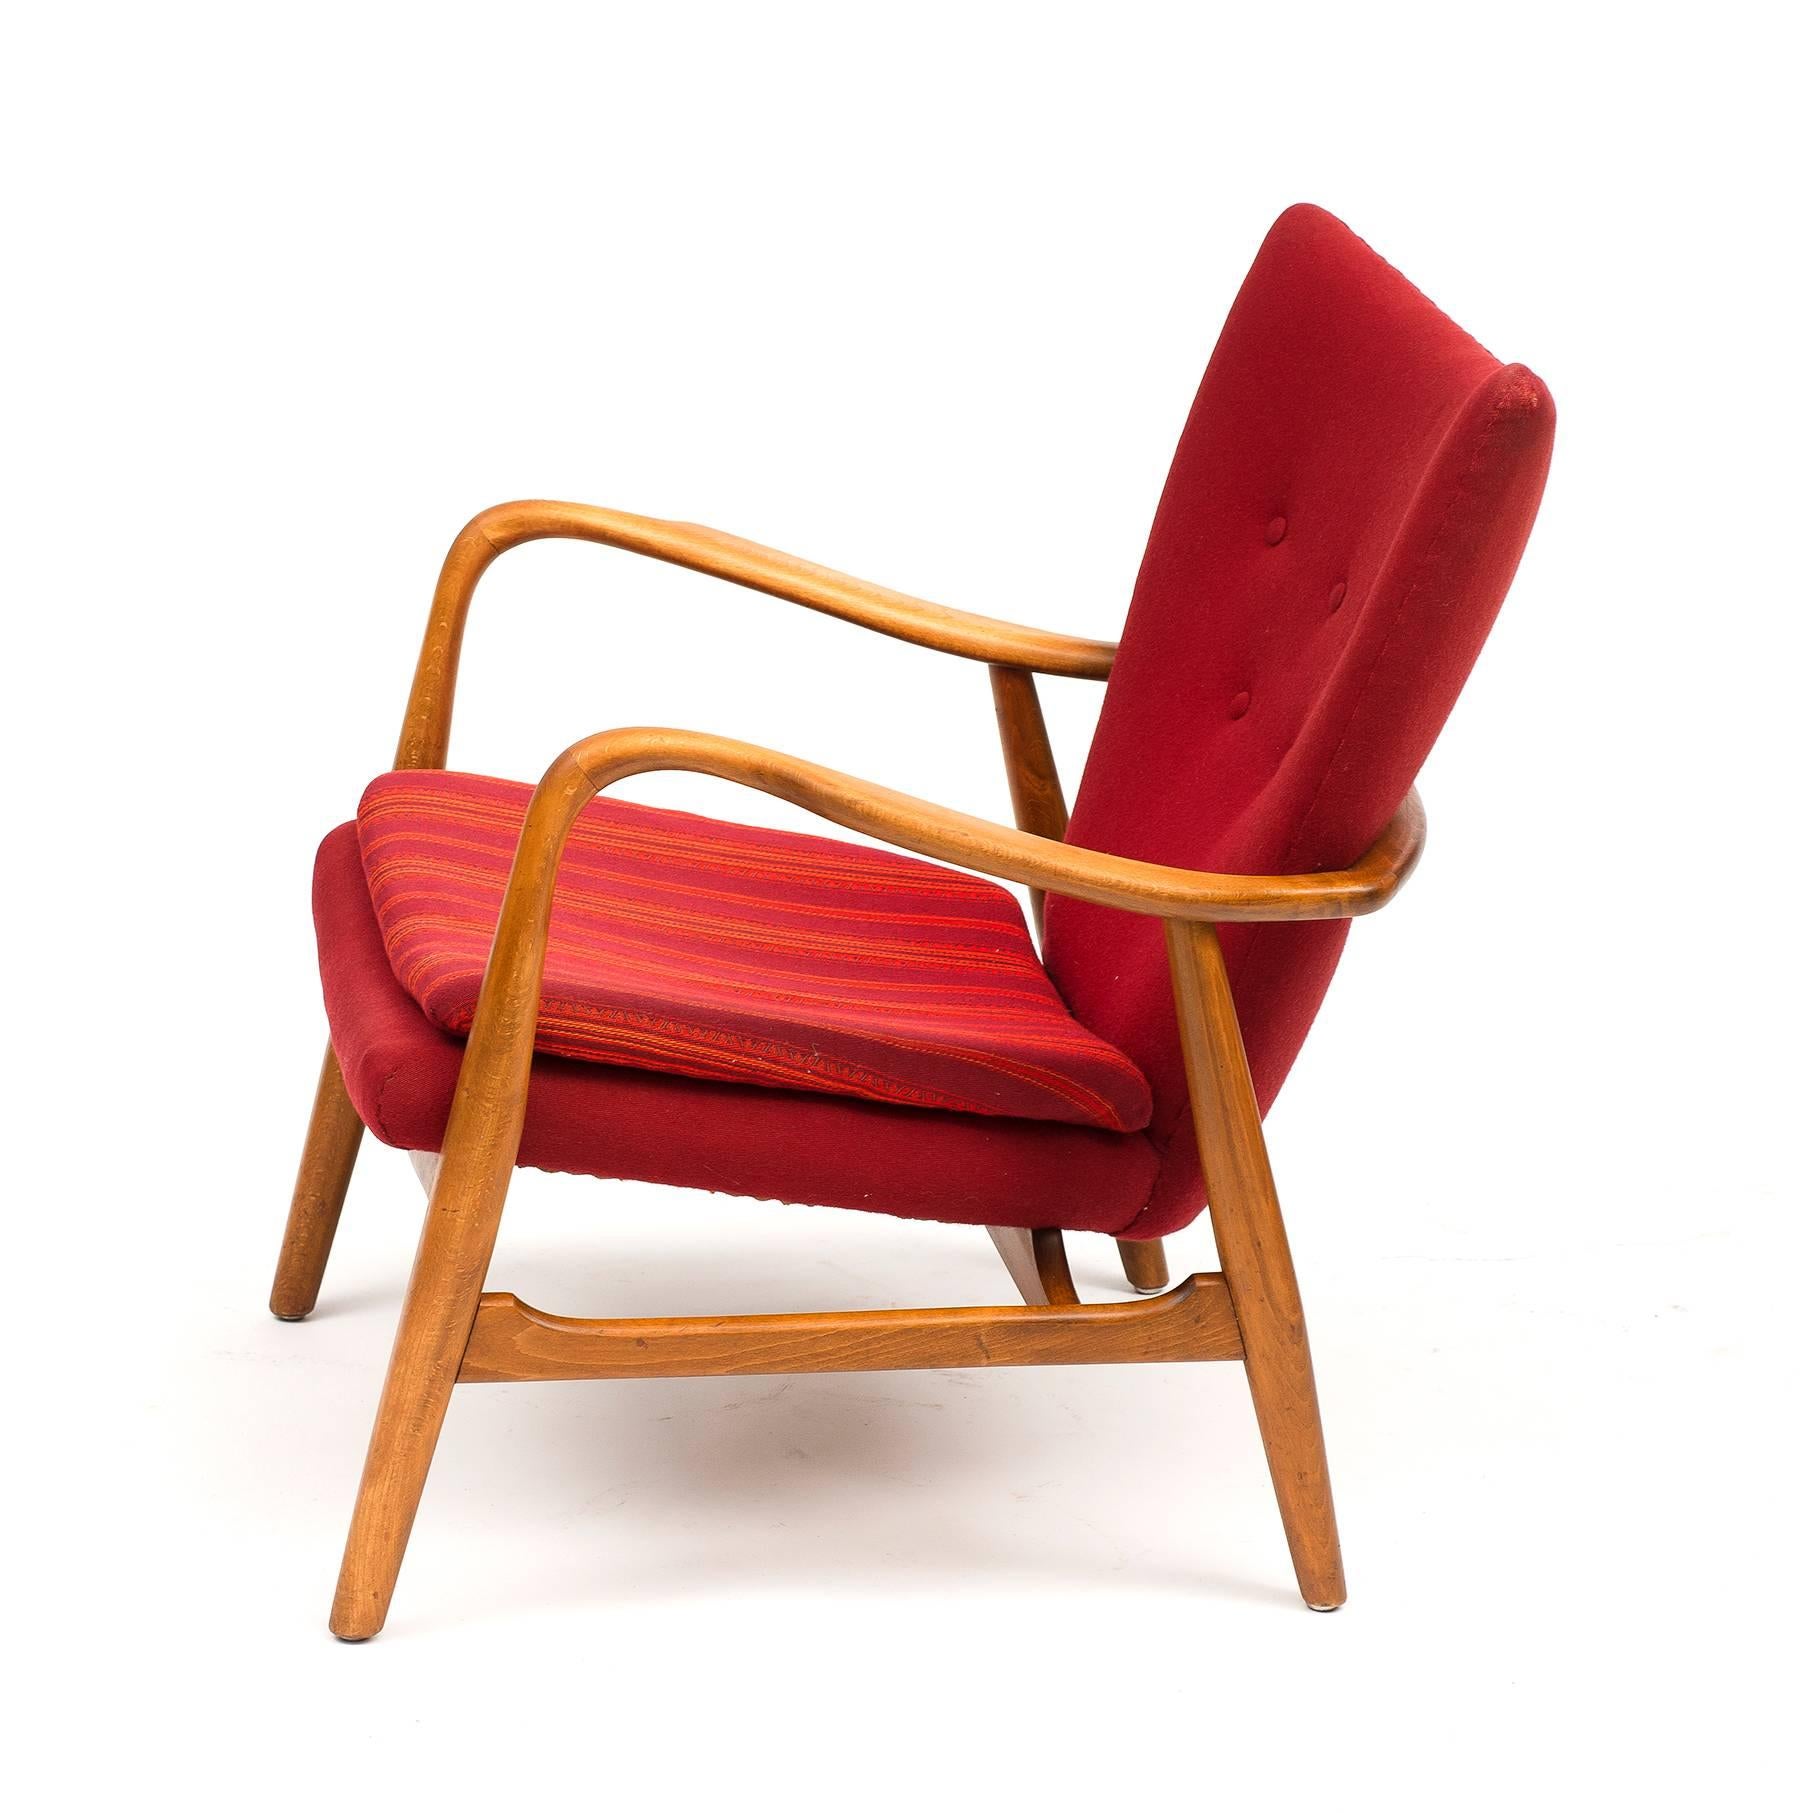 A lounge chair by Acton Schubell and Ib Madsen with frame in beech, upholstered with red wool and striped red seat cushion. Manufactured by Madsen and Schubell, Denmark, 1950s.